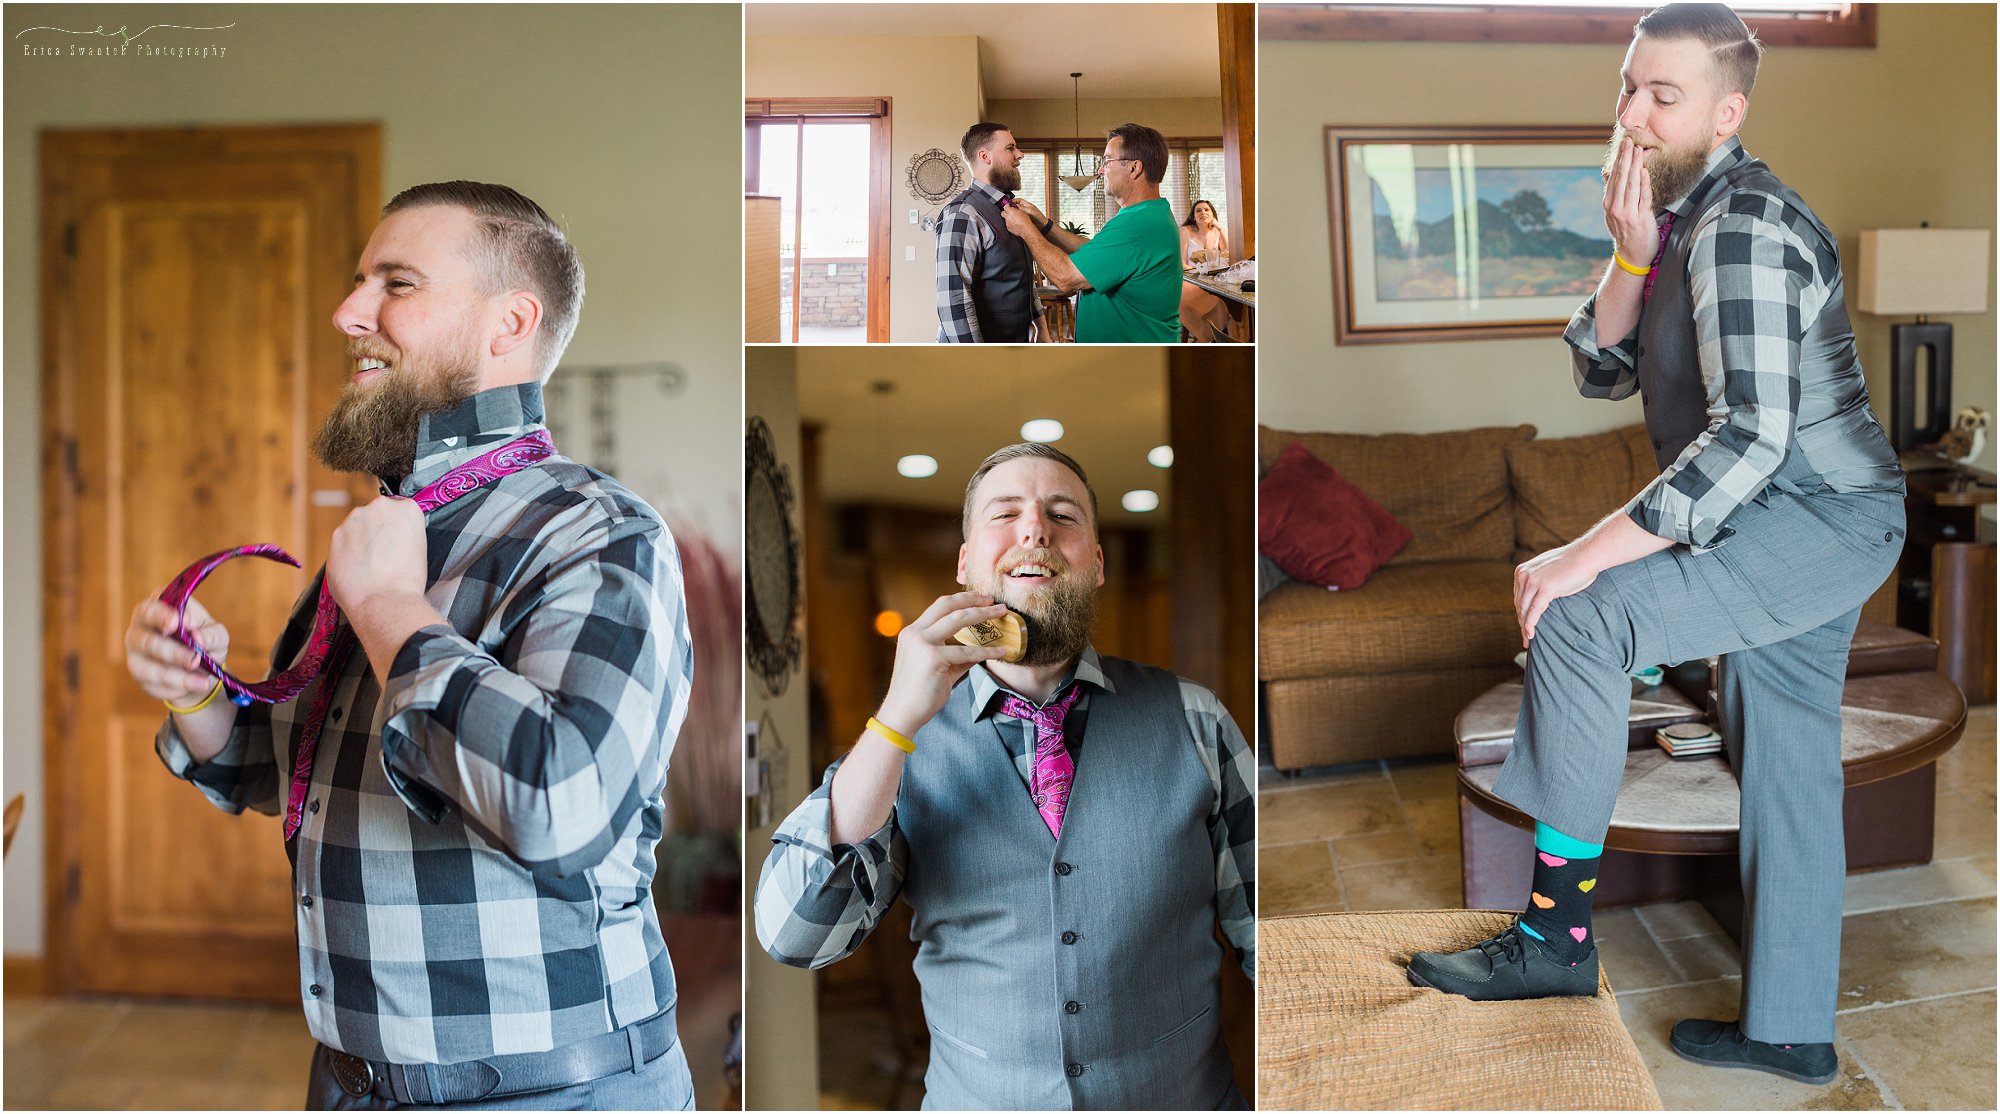 A groom prepares for his wedding day, combing his beard and putting on his unique socks for his intimate Oregon waterfall wedding near Bend, OR. | Erica Swantek Photography